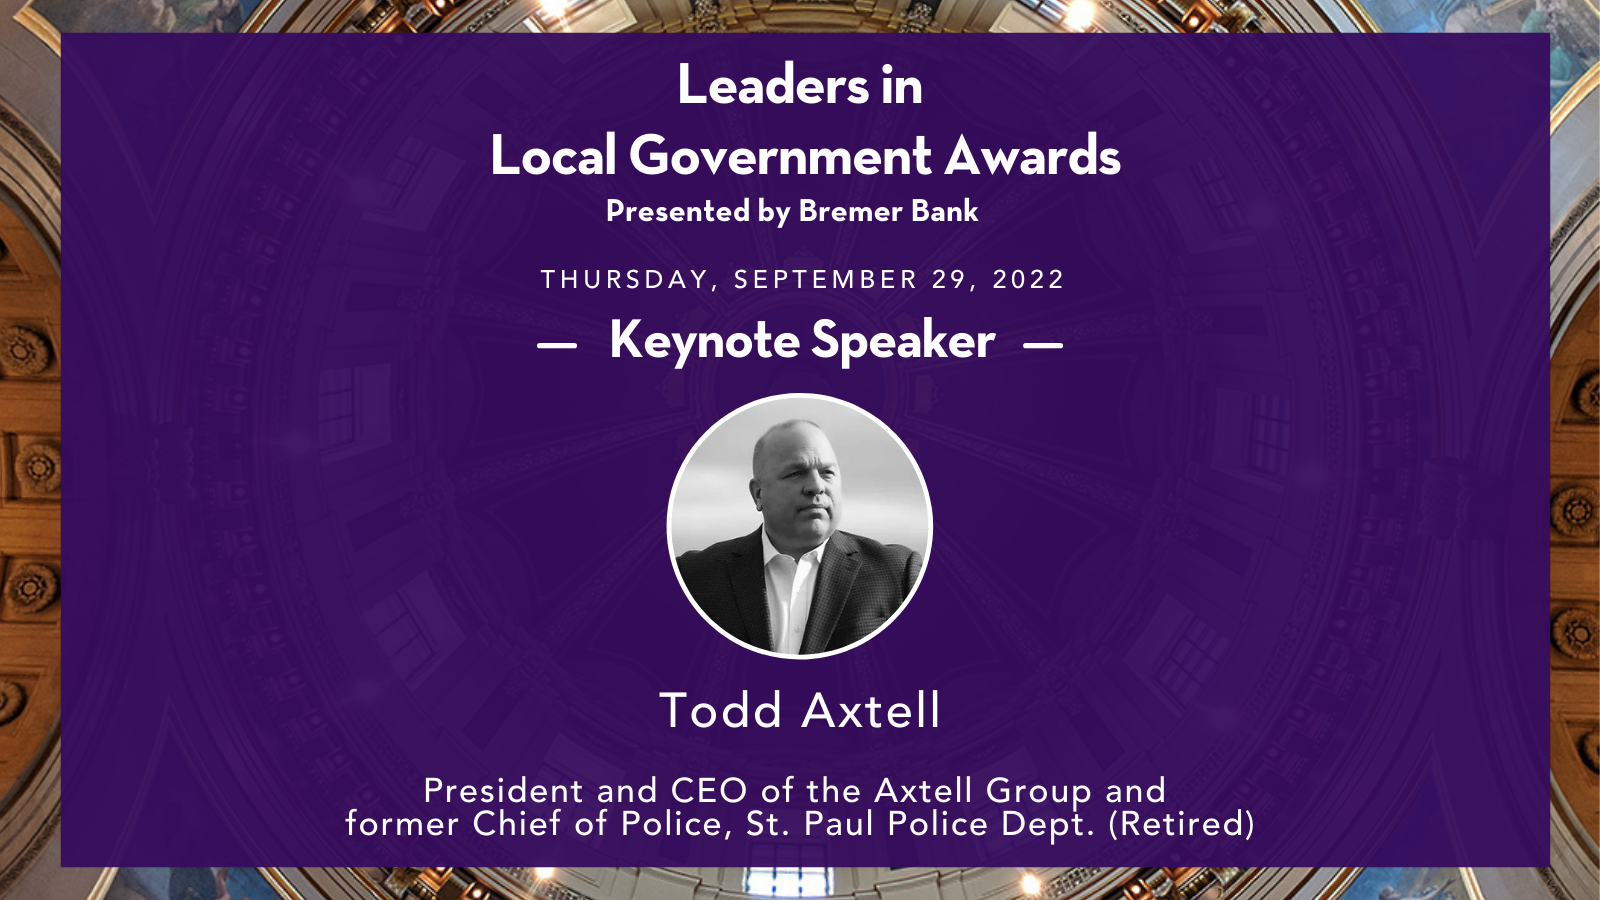 Leaders in Local Government Awards featuring Todd Axtell